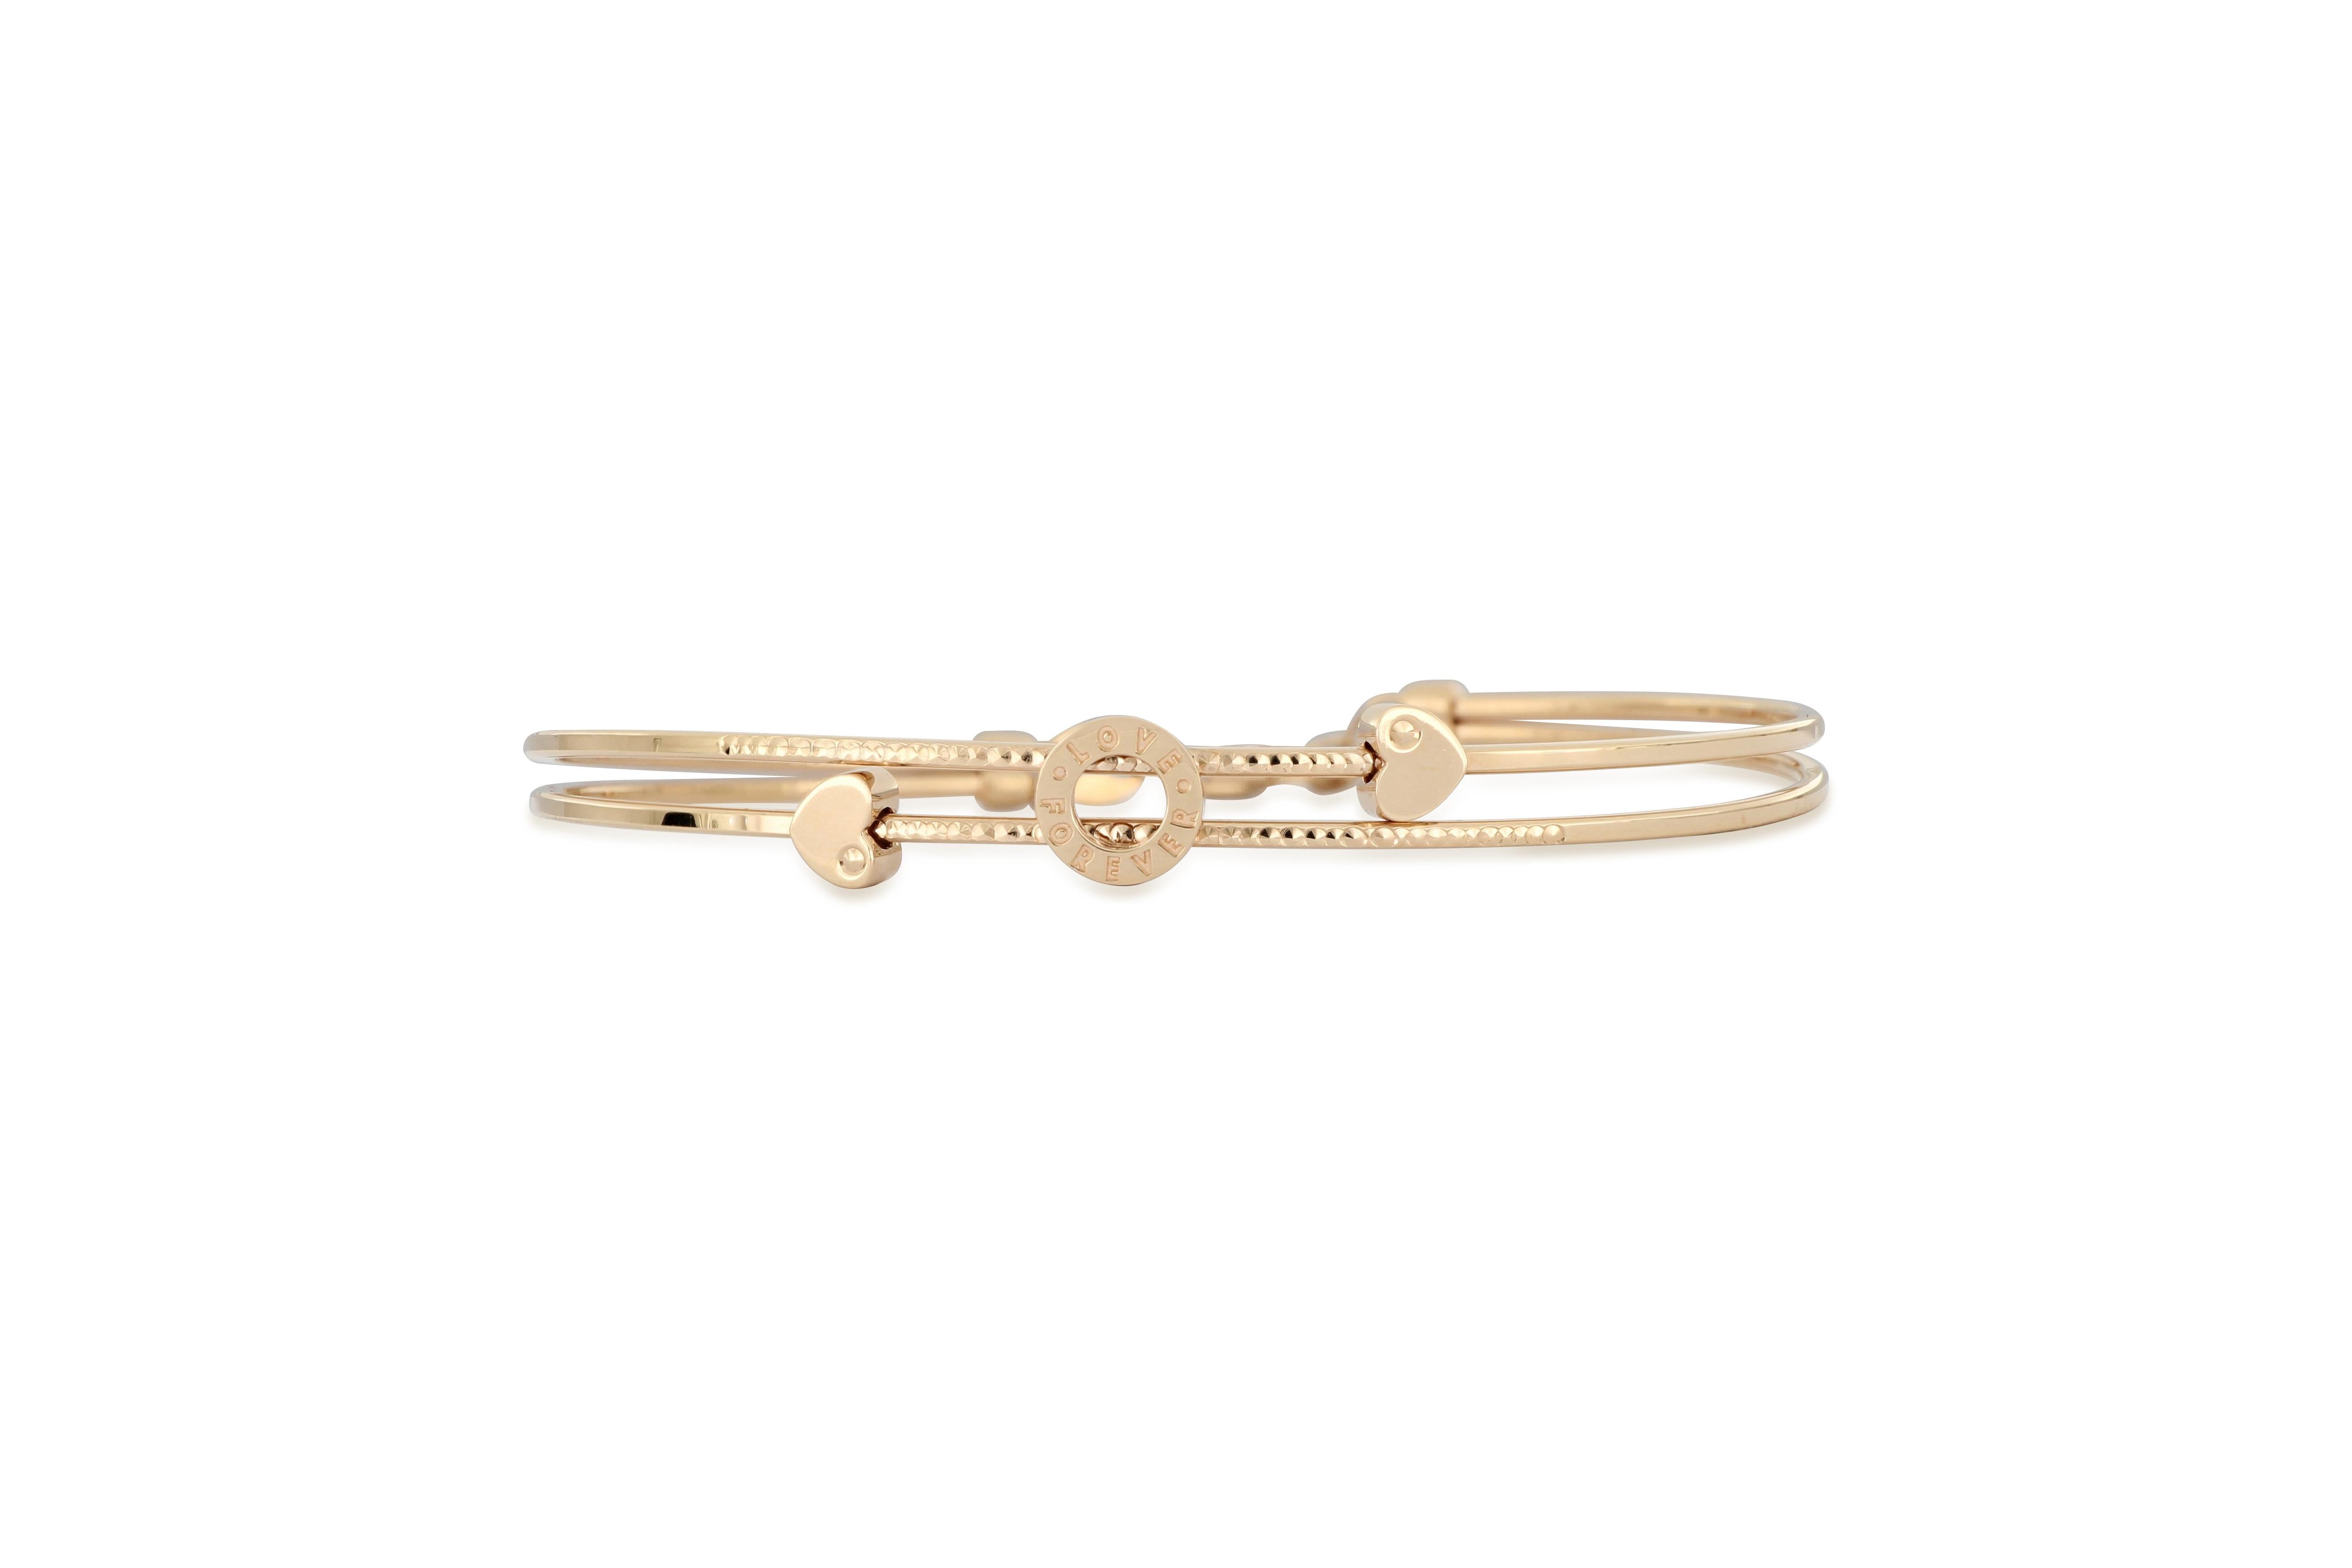 A simple and stylish bangle in 18k rose gold.
The company was founded one and a half centuries ago in Macau. The brand is renowned for its high jewelry collections with fabulous designs. Our designs reflect the cultural and aesthetic value of its